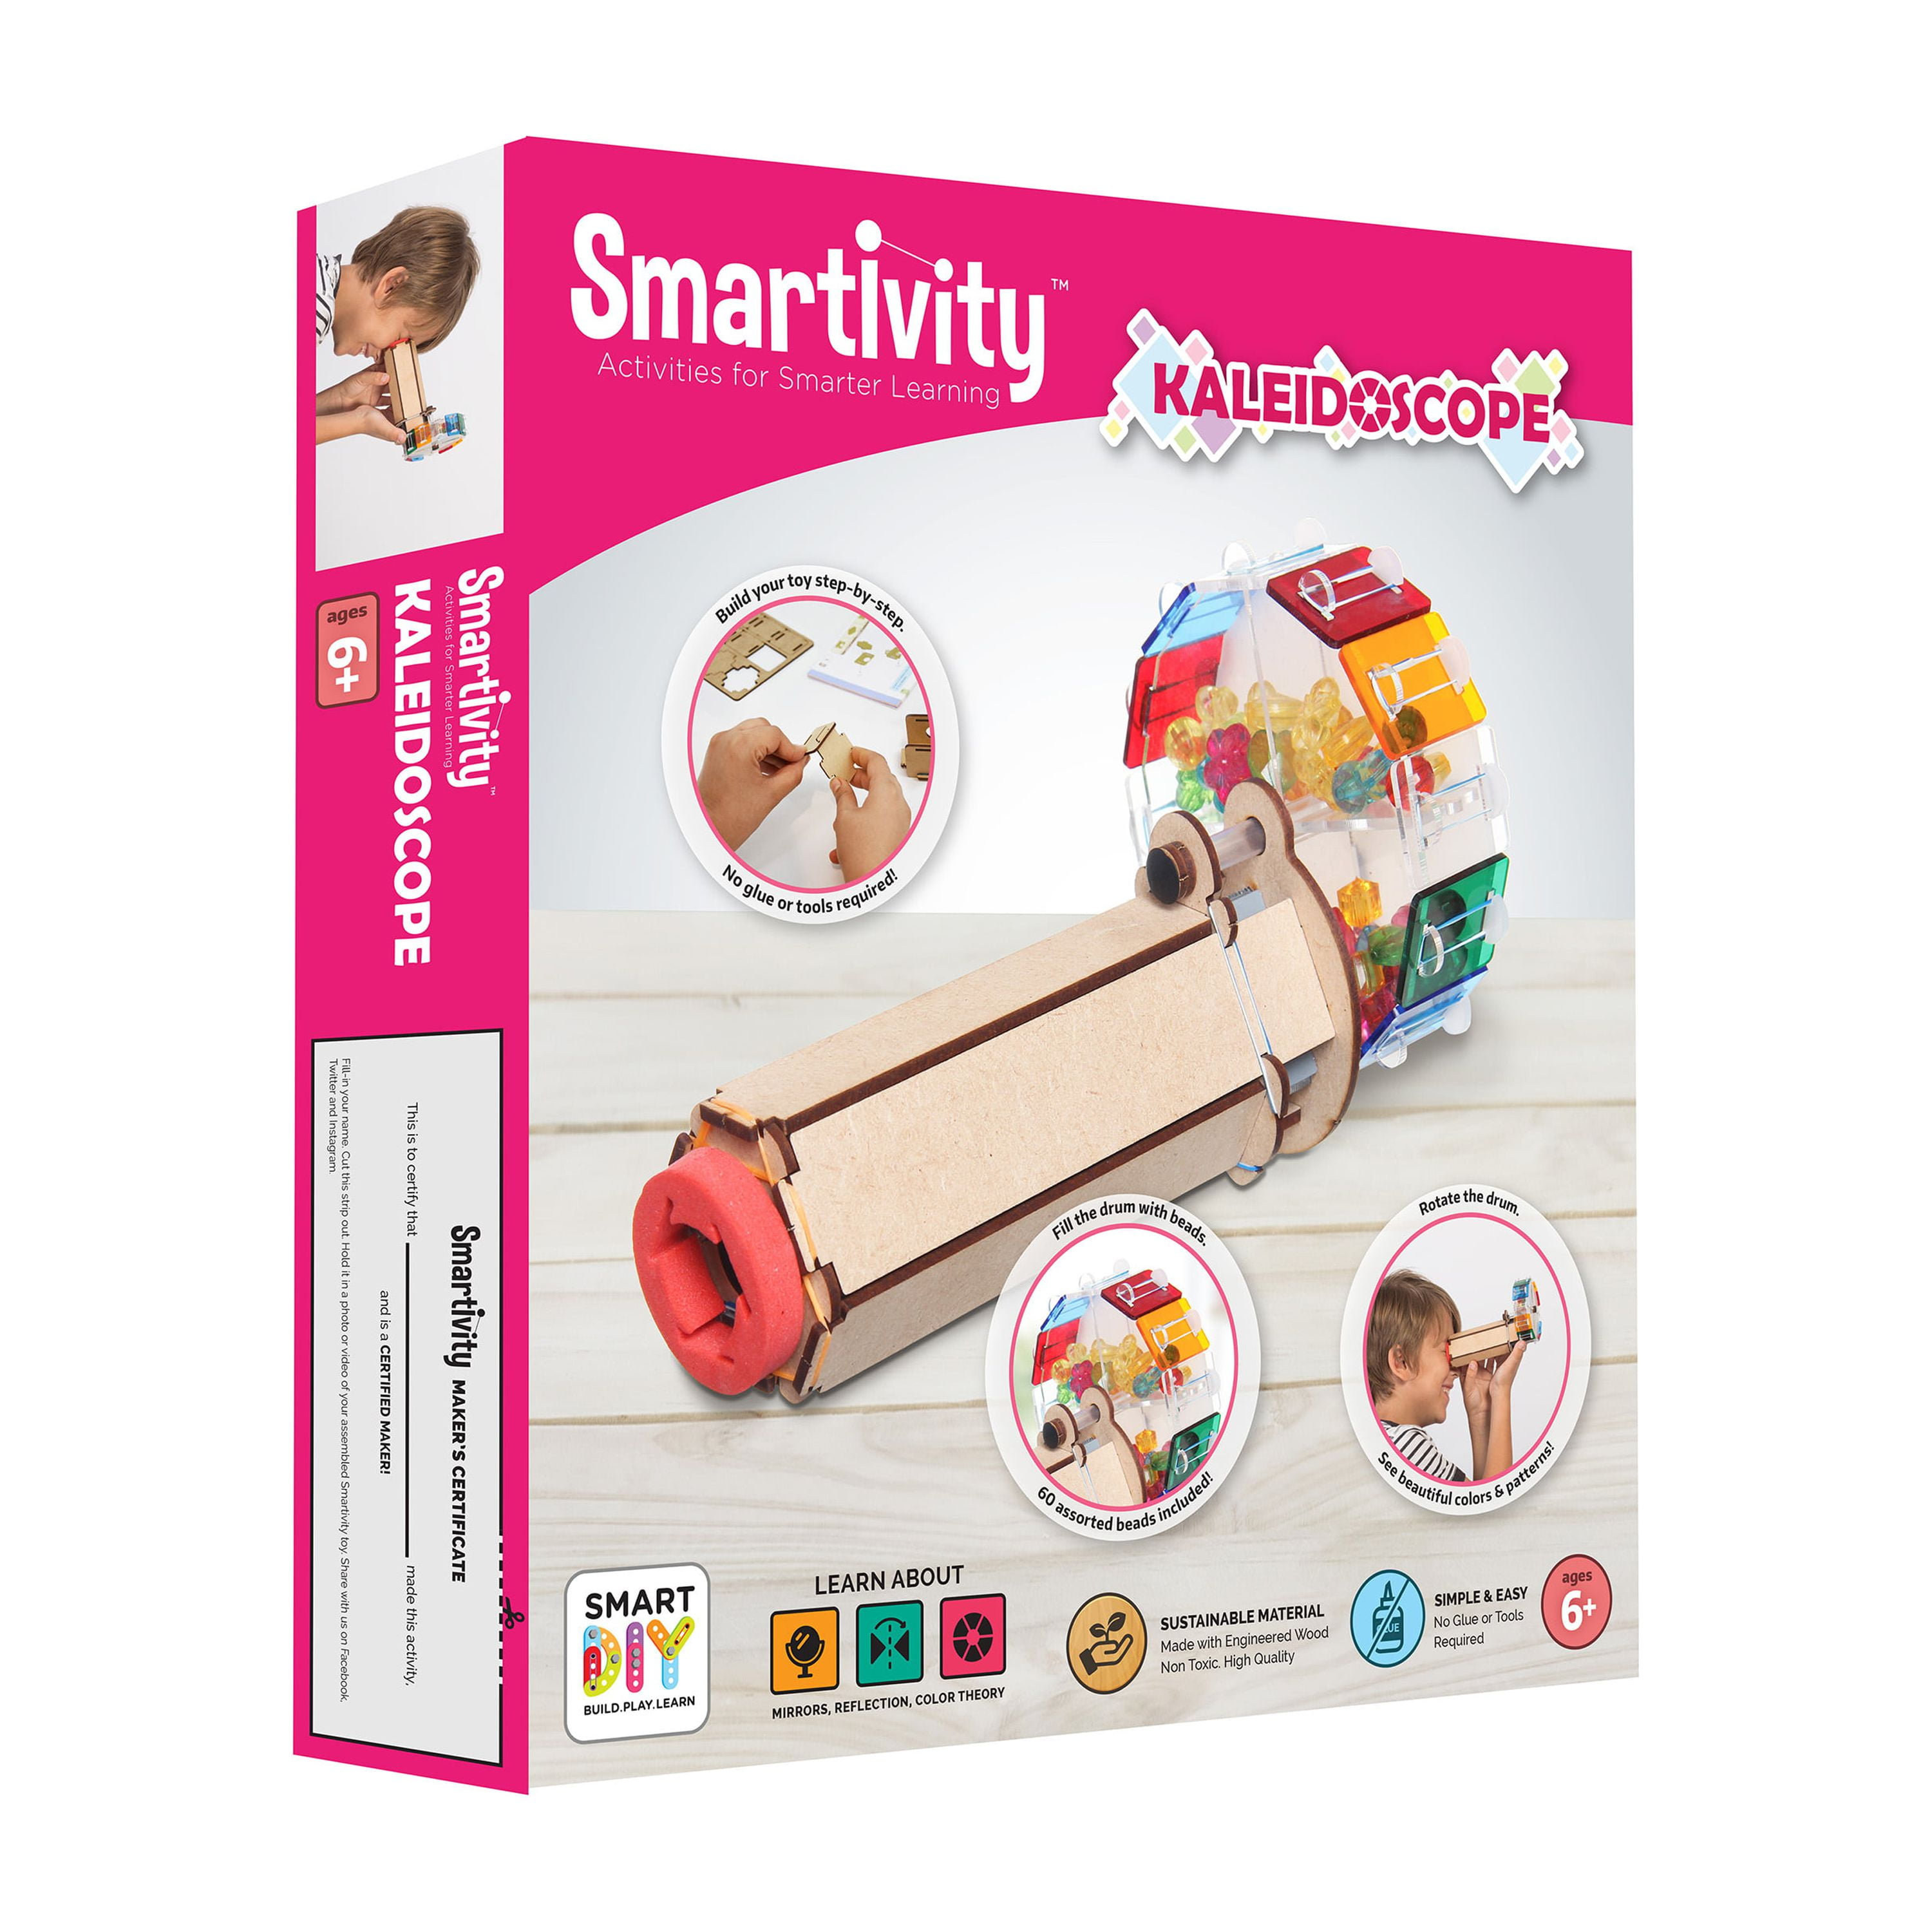 Buzzy ReCycleMe Eco Friendly Child Craft Project Kits for Kids